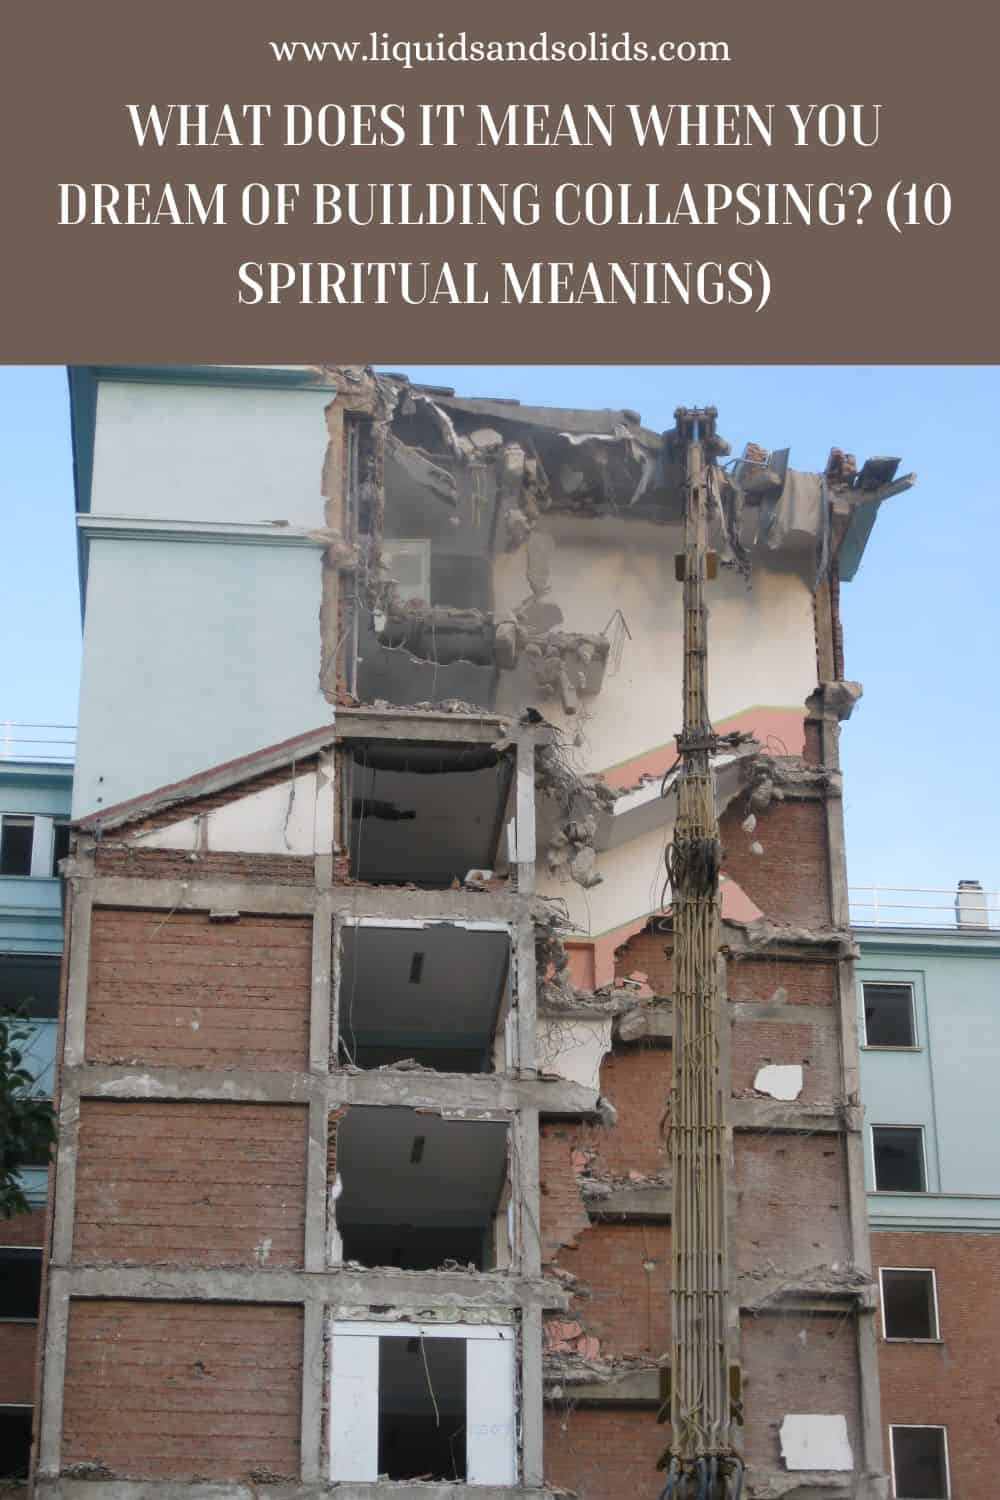 What Does It Mean When You Dream of Building Collapsing? (10 Spiritual Meanings)